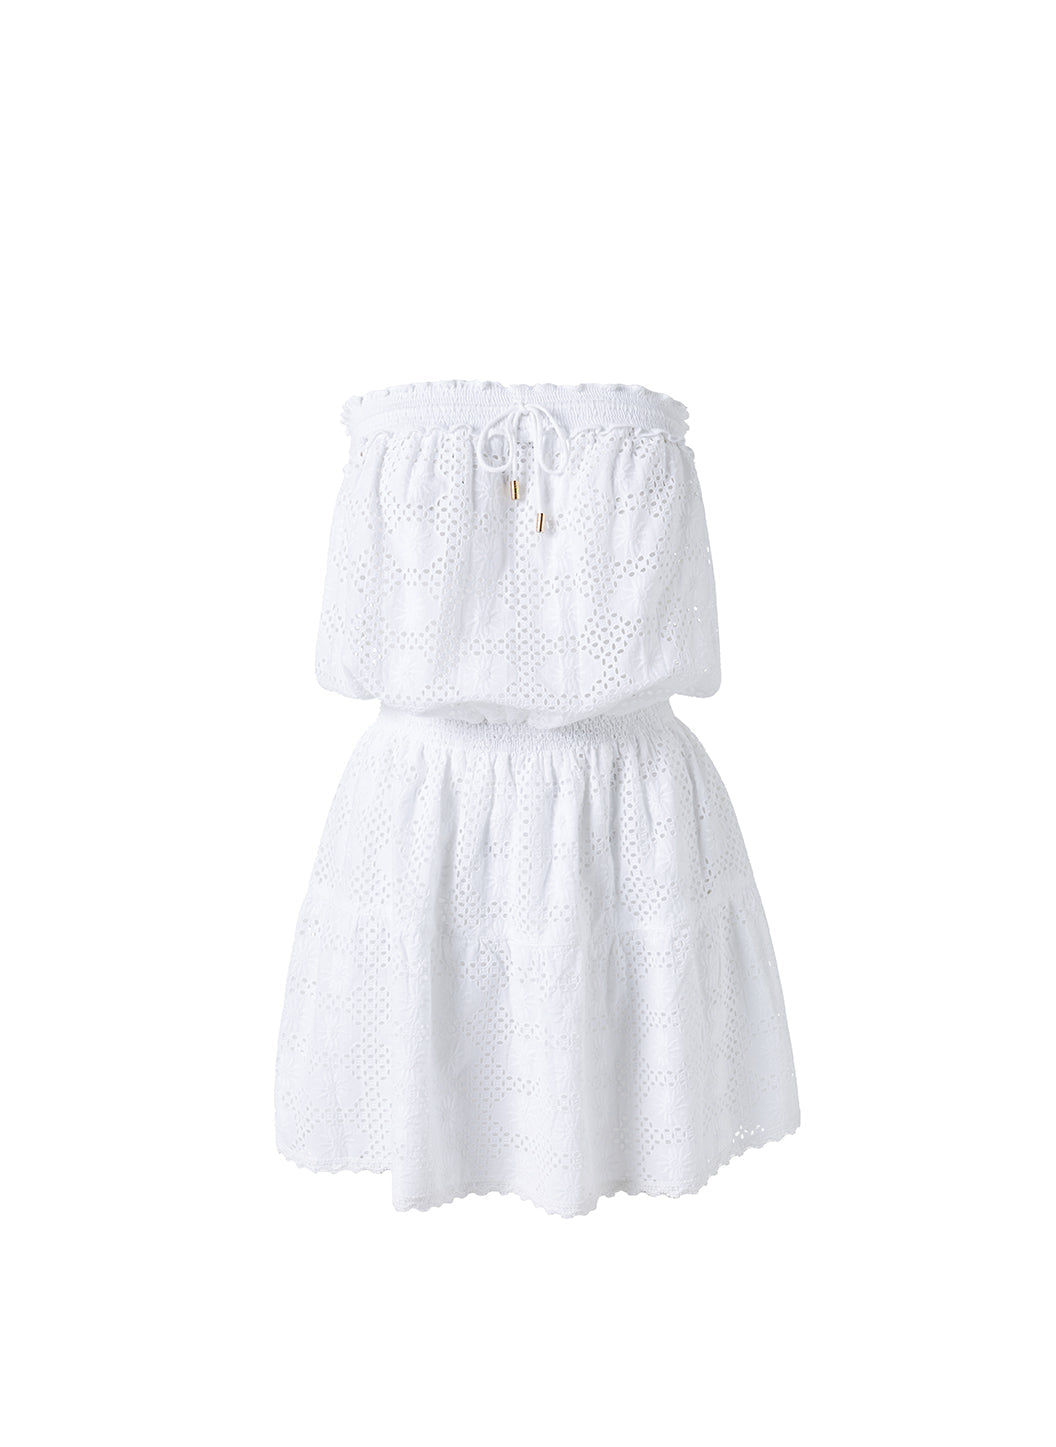 Colette broderie anglaise cotton minidress